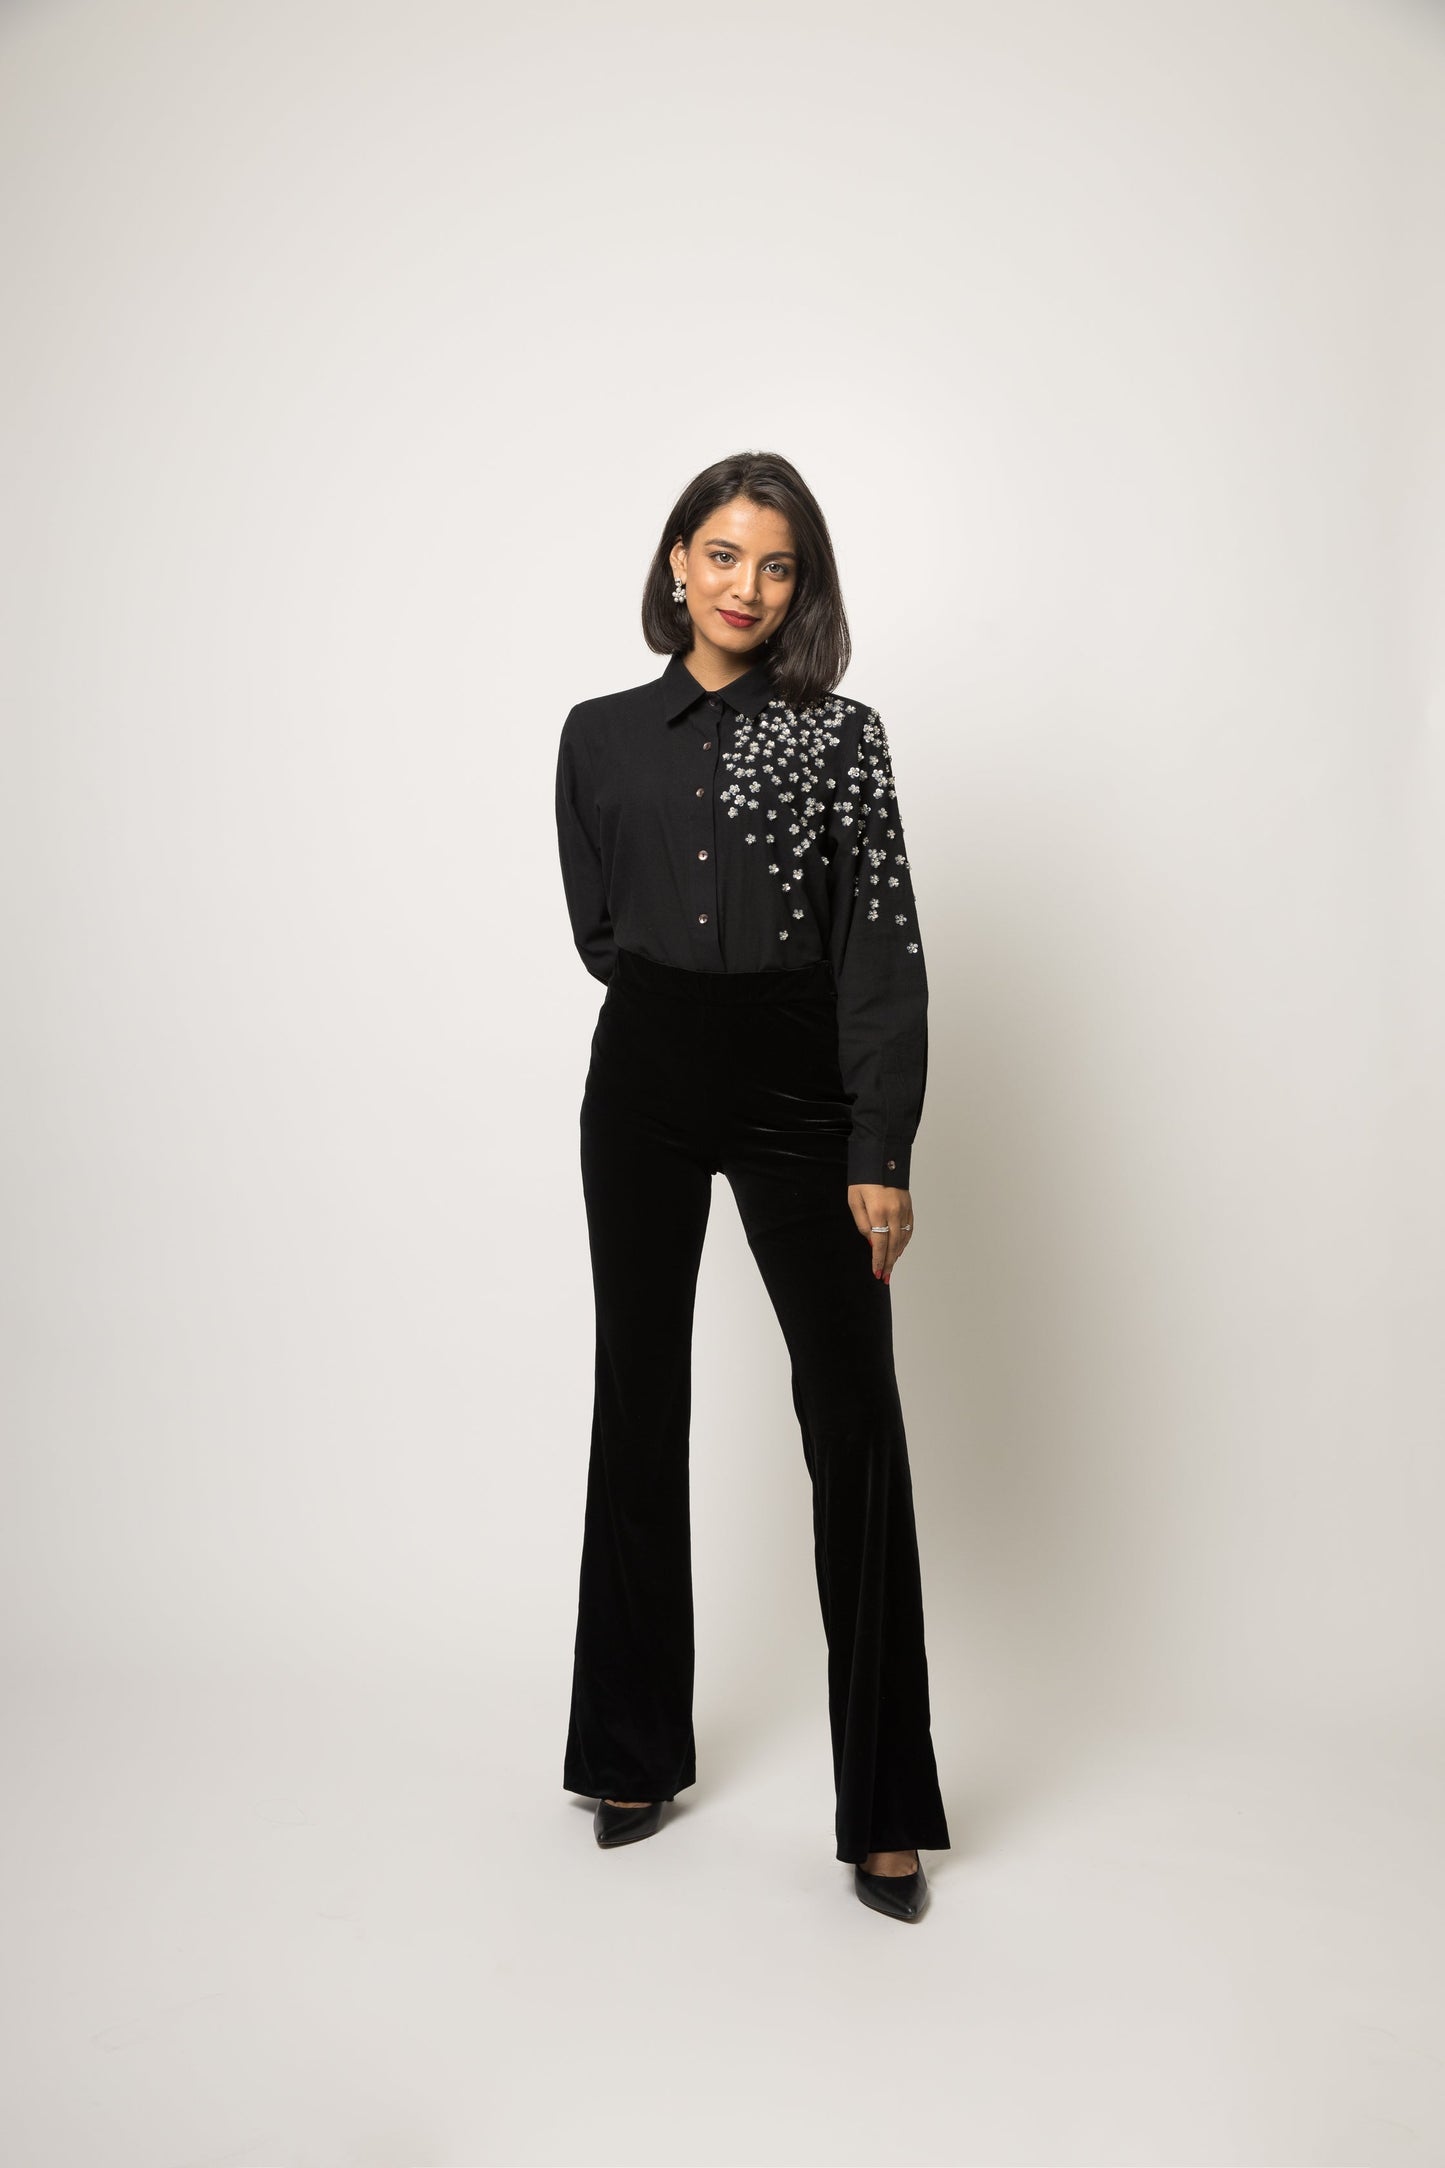 Floral Sparkle Shirt by Anushé Pirani with 100% pure cotton, Black, Embellished, Handwoven cotton, Party Wear, Shirts, The Festive Edit, The Festive Edit by Anushe Pirani, Womenswear at Kamakhyaa for sustainable fashion